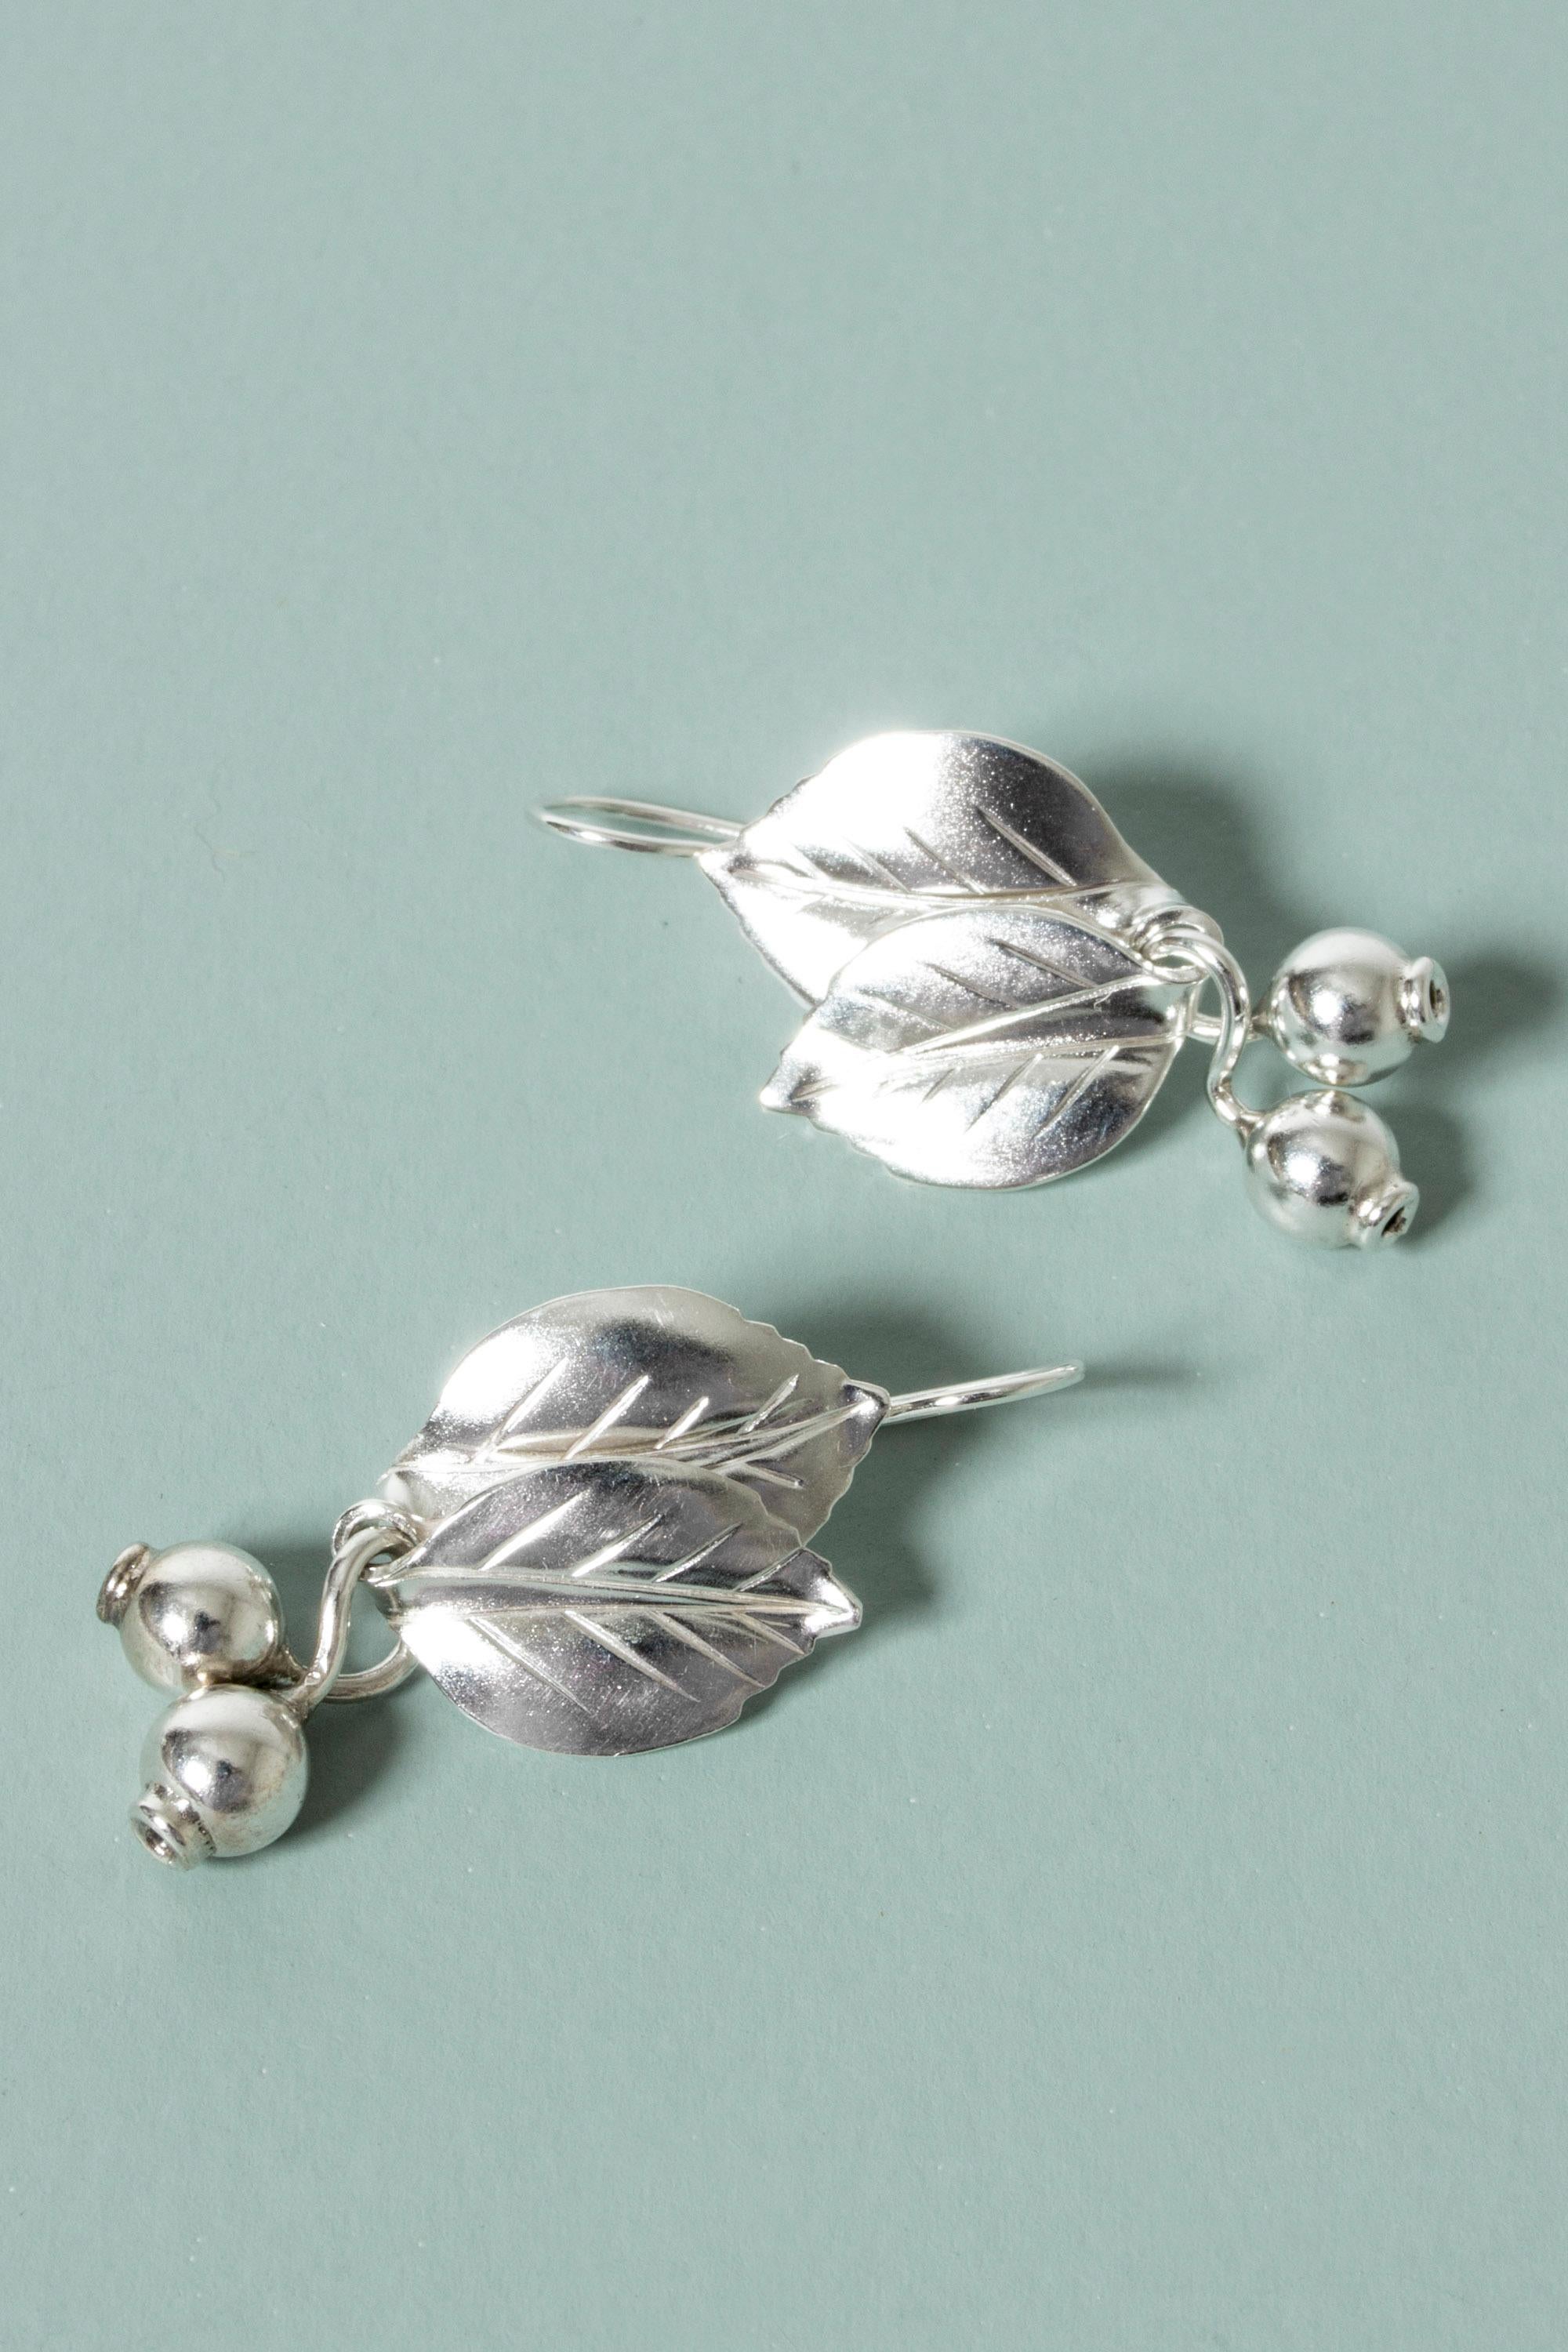 Pair of exquisite silver earrings by Gertrud Engel, made in the form of leaves with berries hanging from the bottom. Beautiful execution!
